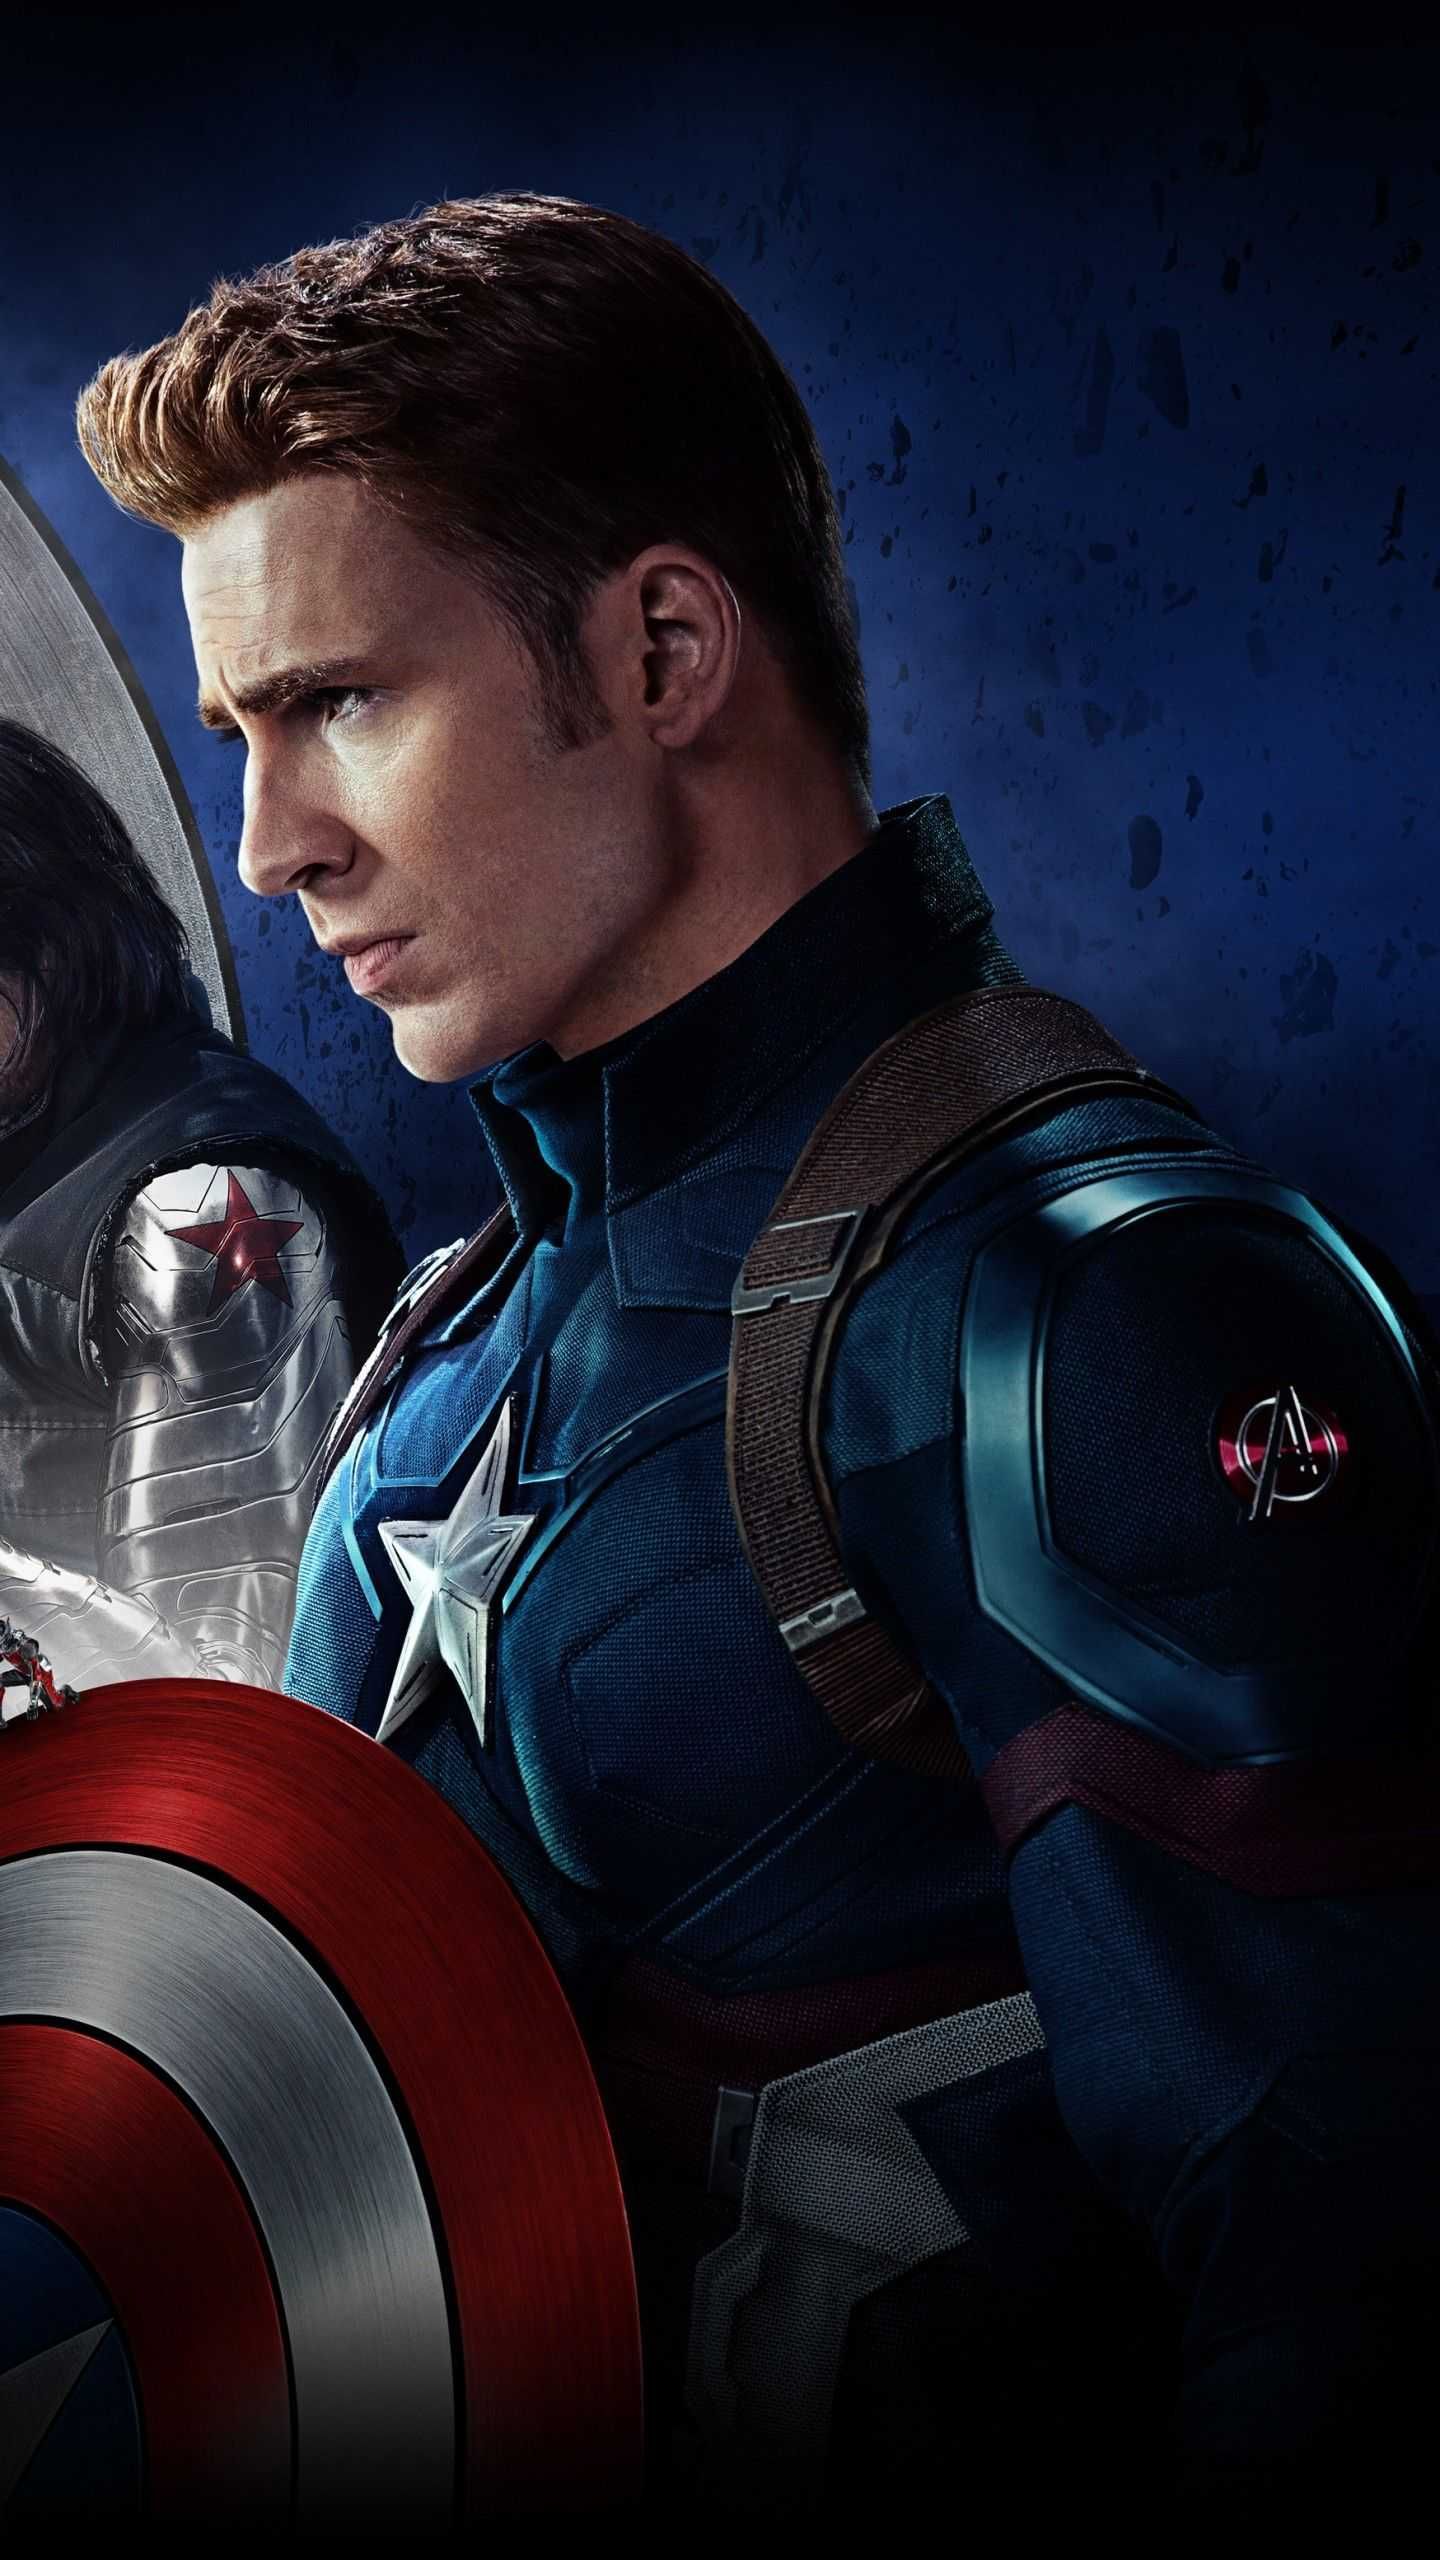 Captain America Wallpaper Discover more android, Avengers, background, desktop, iphone wallpaper.. Captain america wallpaper, Captain america, Captain